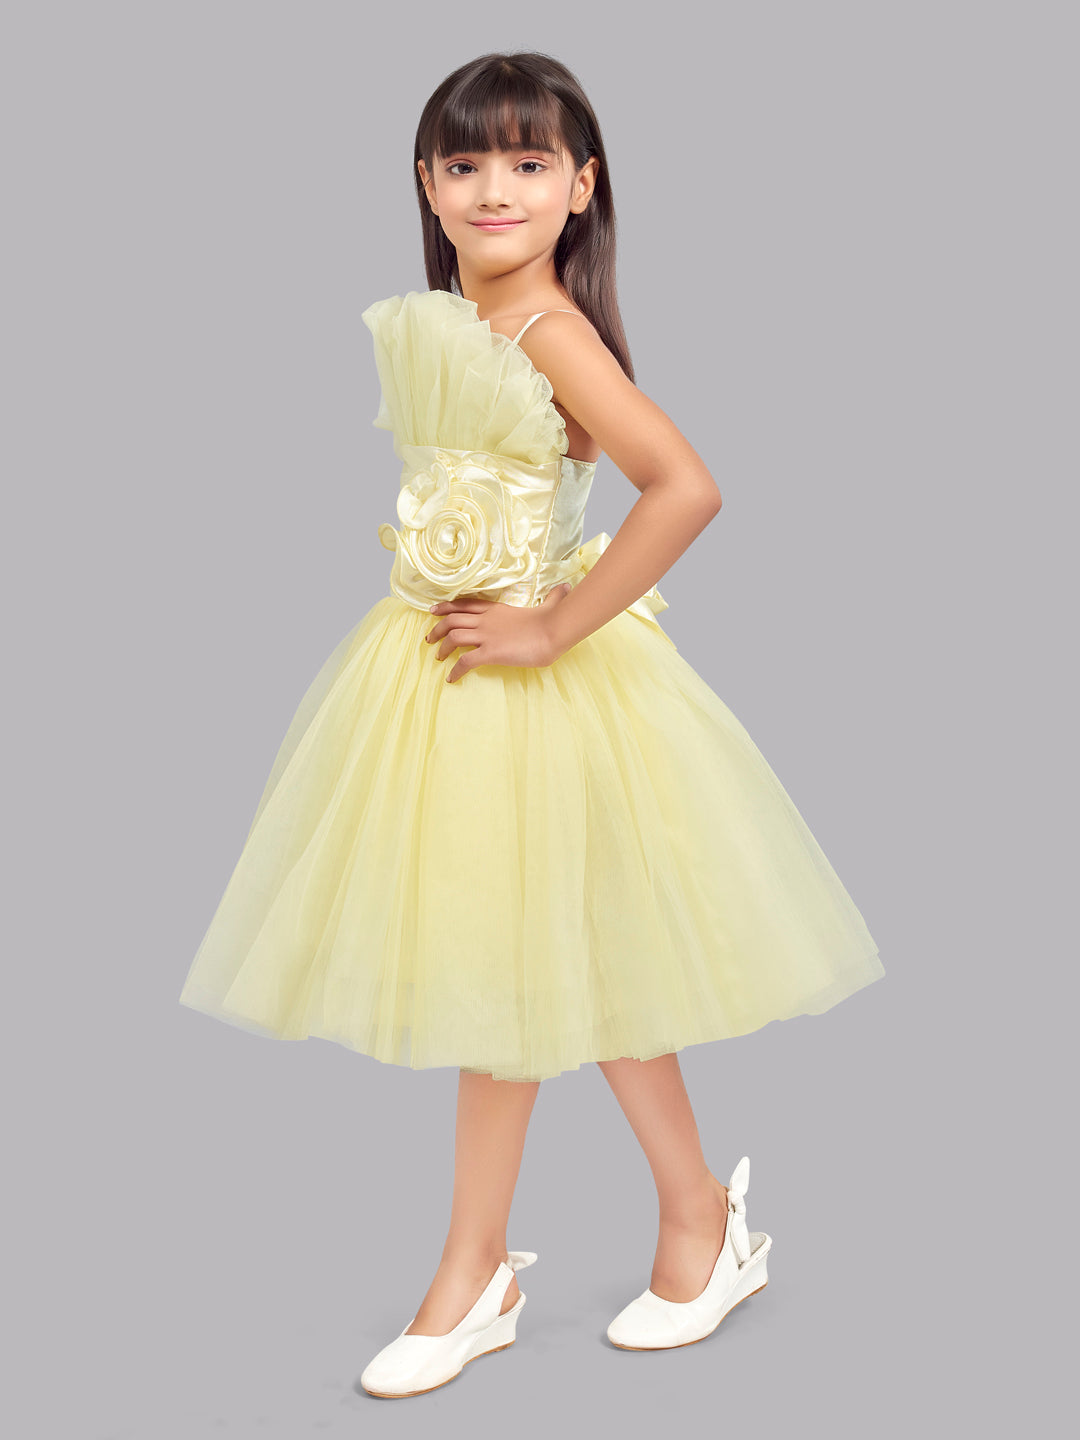 Ruffled Silhouette Party Dress -Yellow